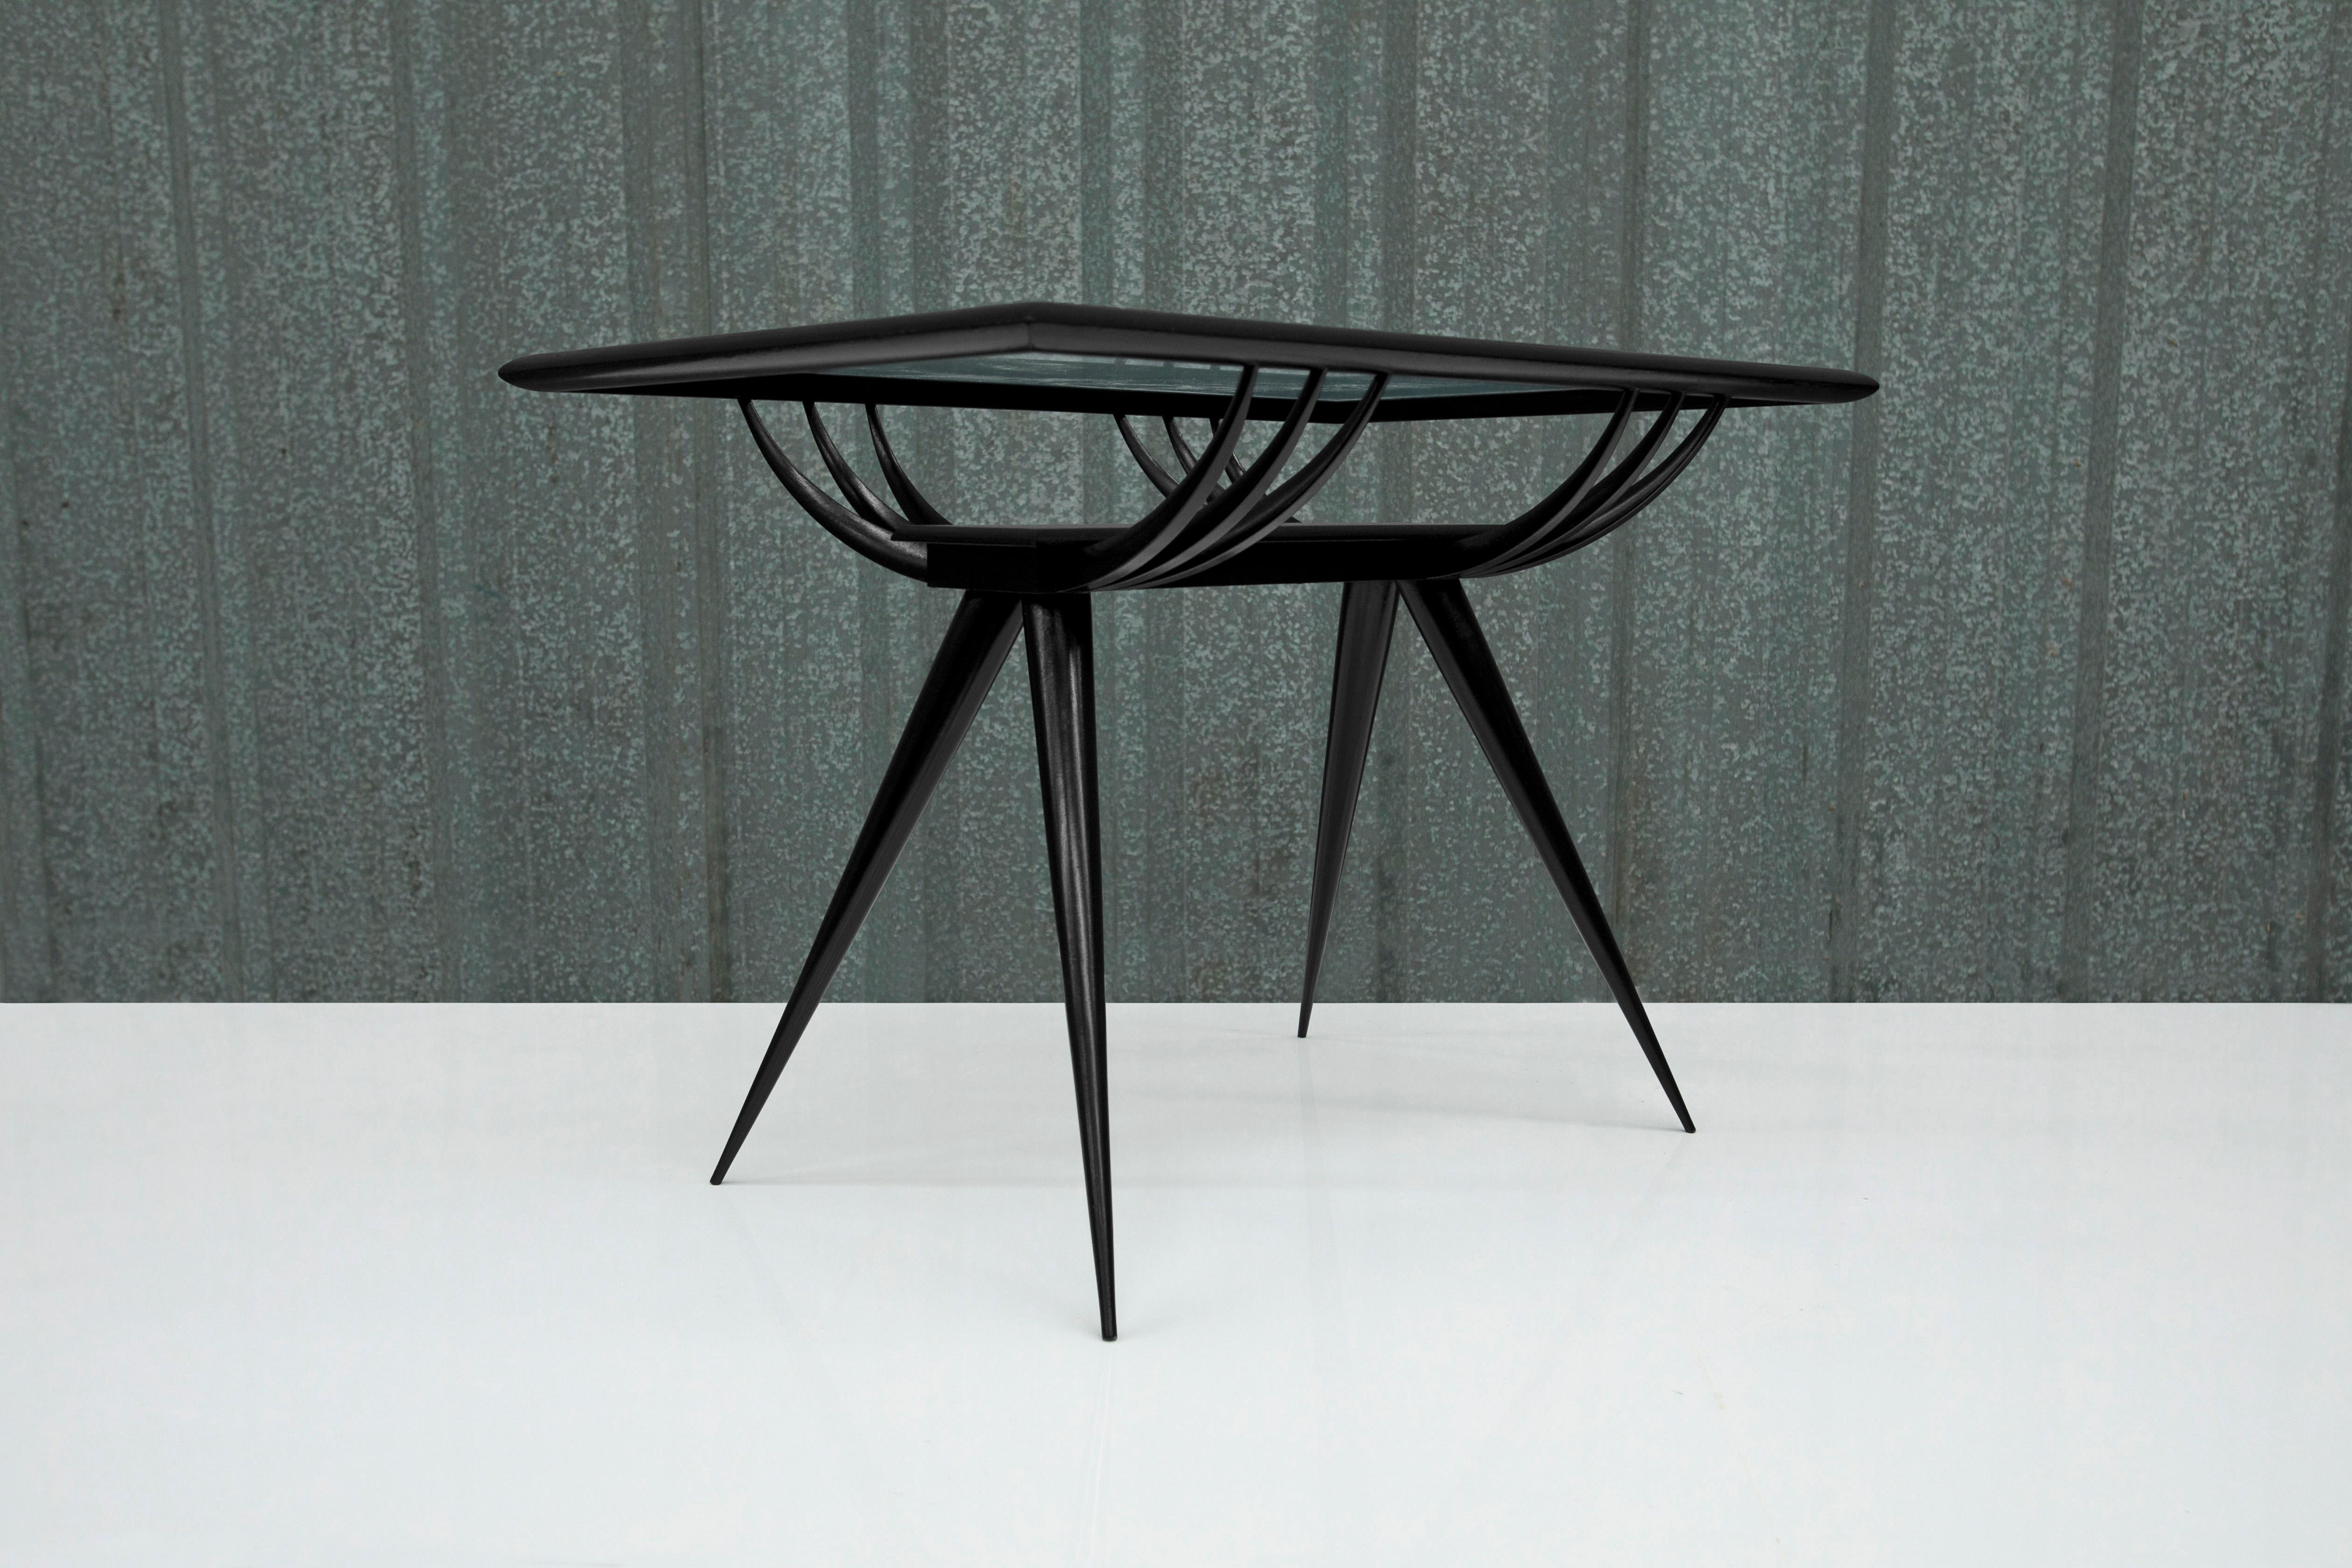 Available today, this Brazilian Modern coffee table in Hardwood and Glass by Giuseppe Scapinelli, 1950s, Brazil is absolutely gorgeous!

The coffee table is made in hardwood painted in black, and features four toothpick legs, a middle shelf and